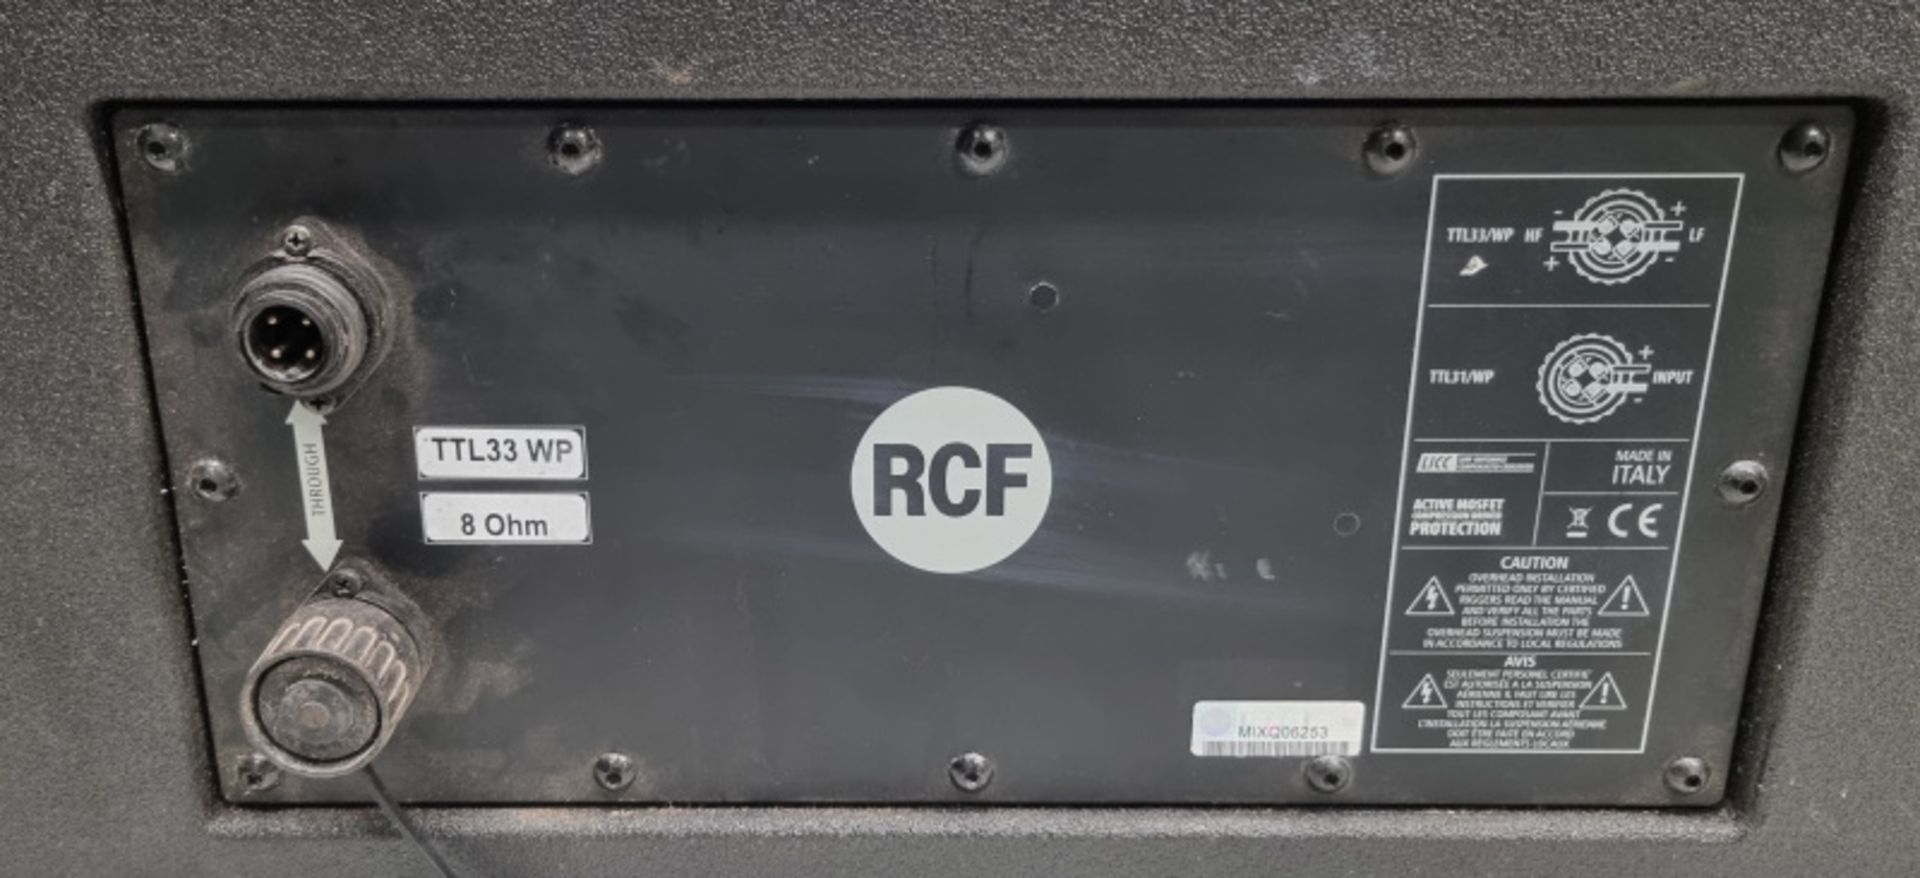 RCF TTL33/WP 3-way active line array module - Image 3 of 3